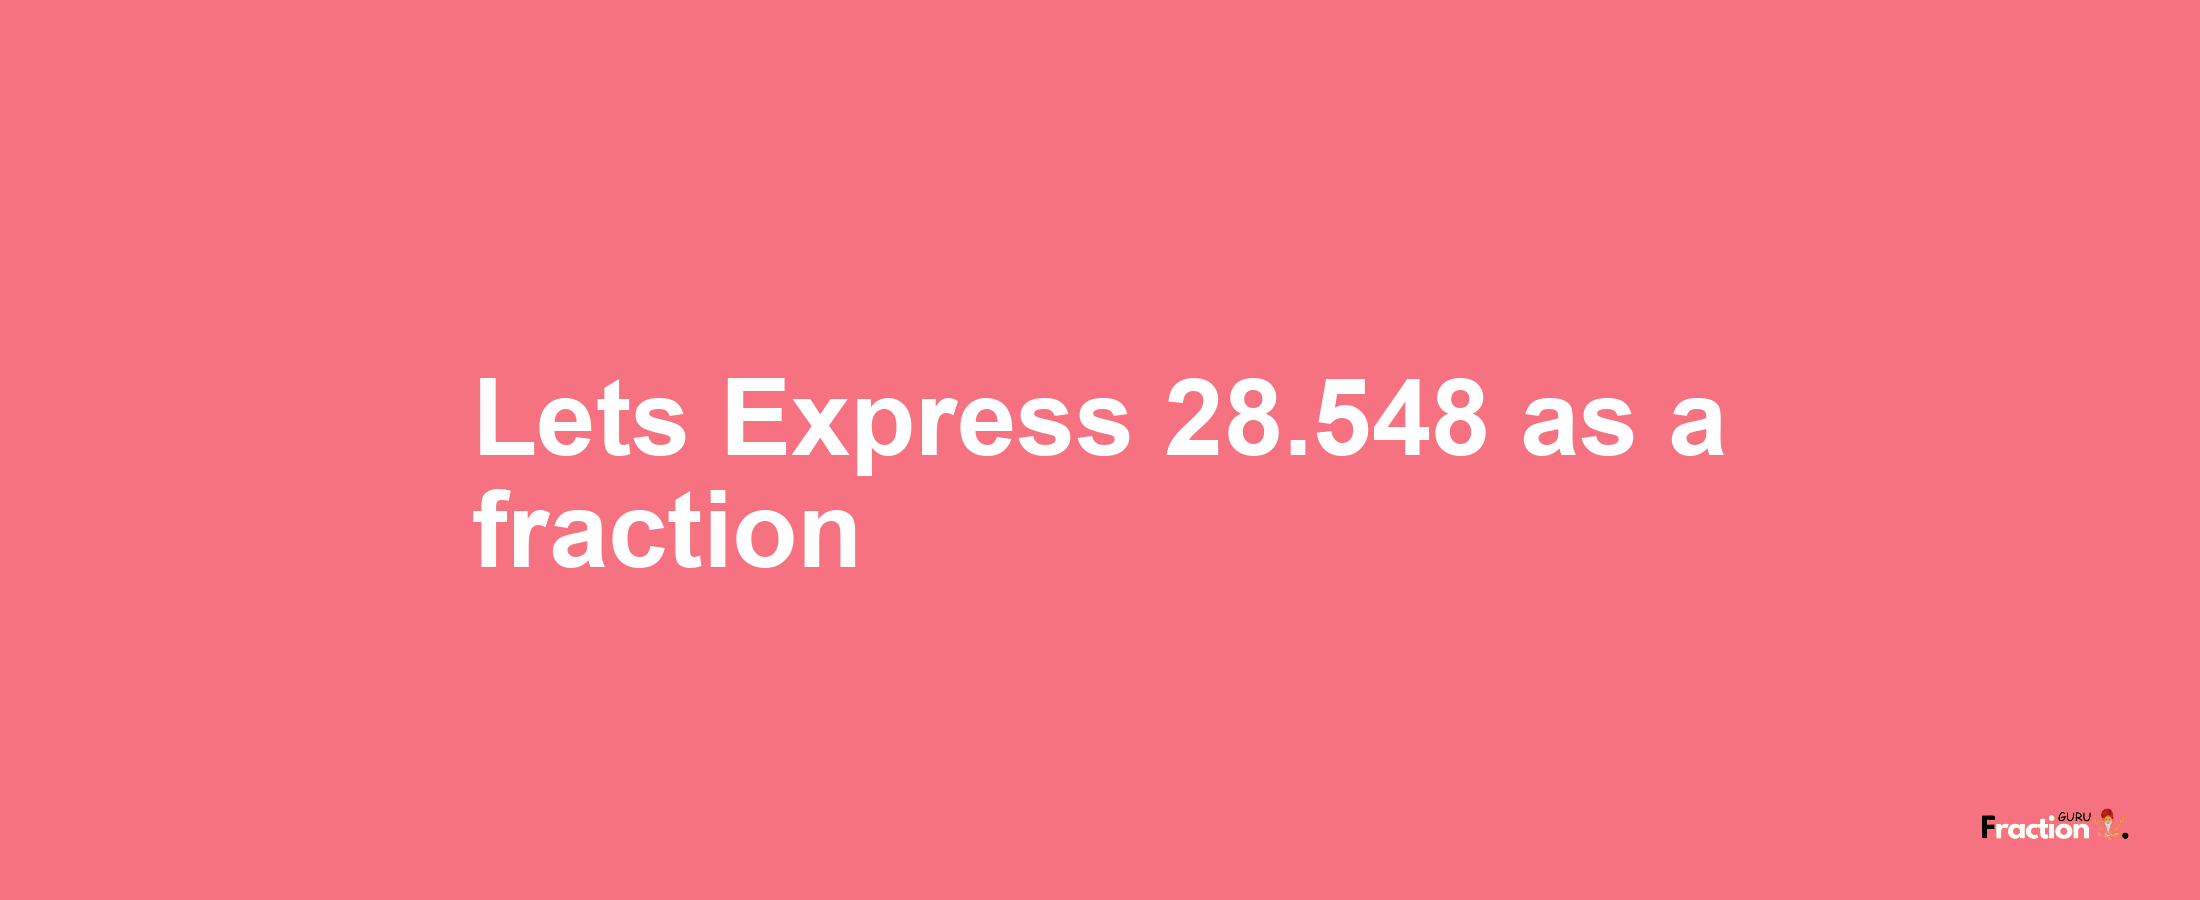 Lets Express 28.548 as afraction